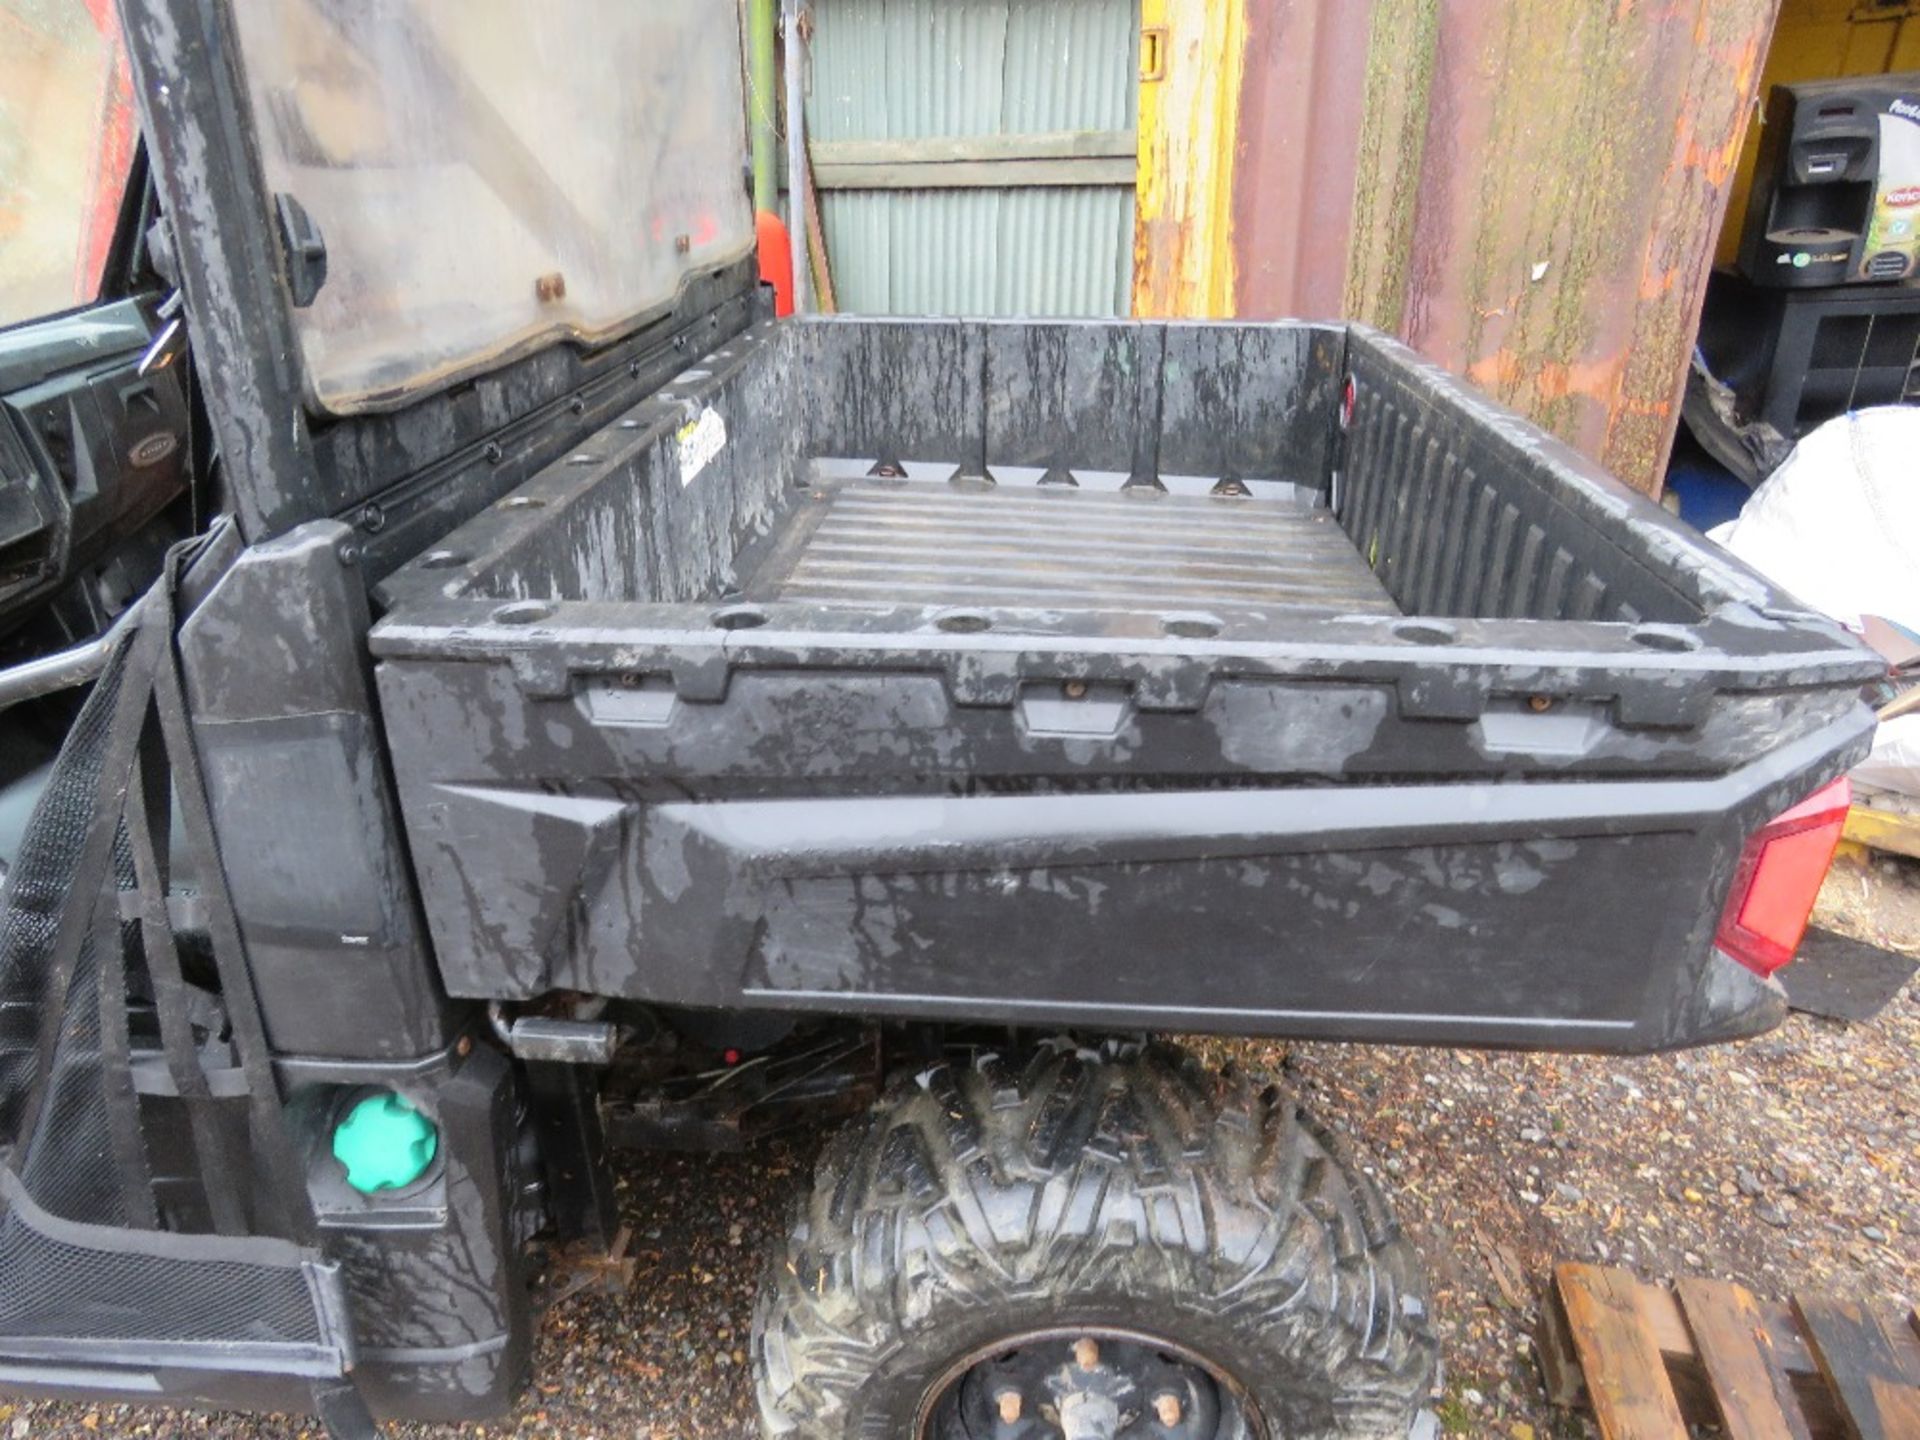 POLARIS RANGER DIESEL RTV BUGGY REG:EU68 EOY. FRONT AND REAR SCREENS AND ROOF. 2018 WITH V5. WHEN TE - Image 7 of 12